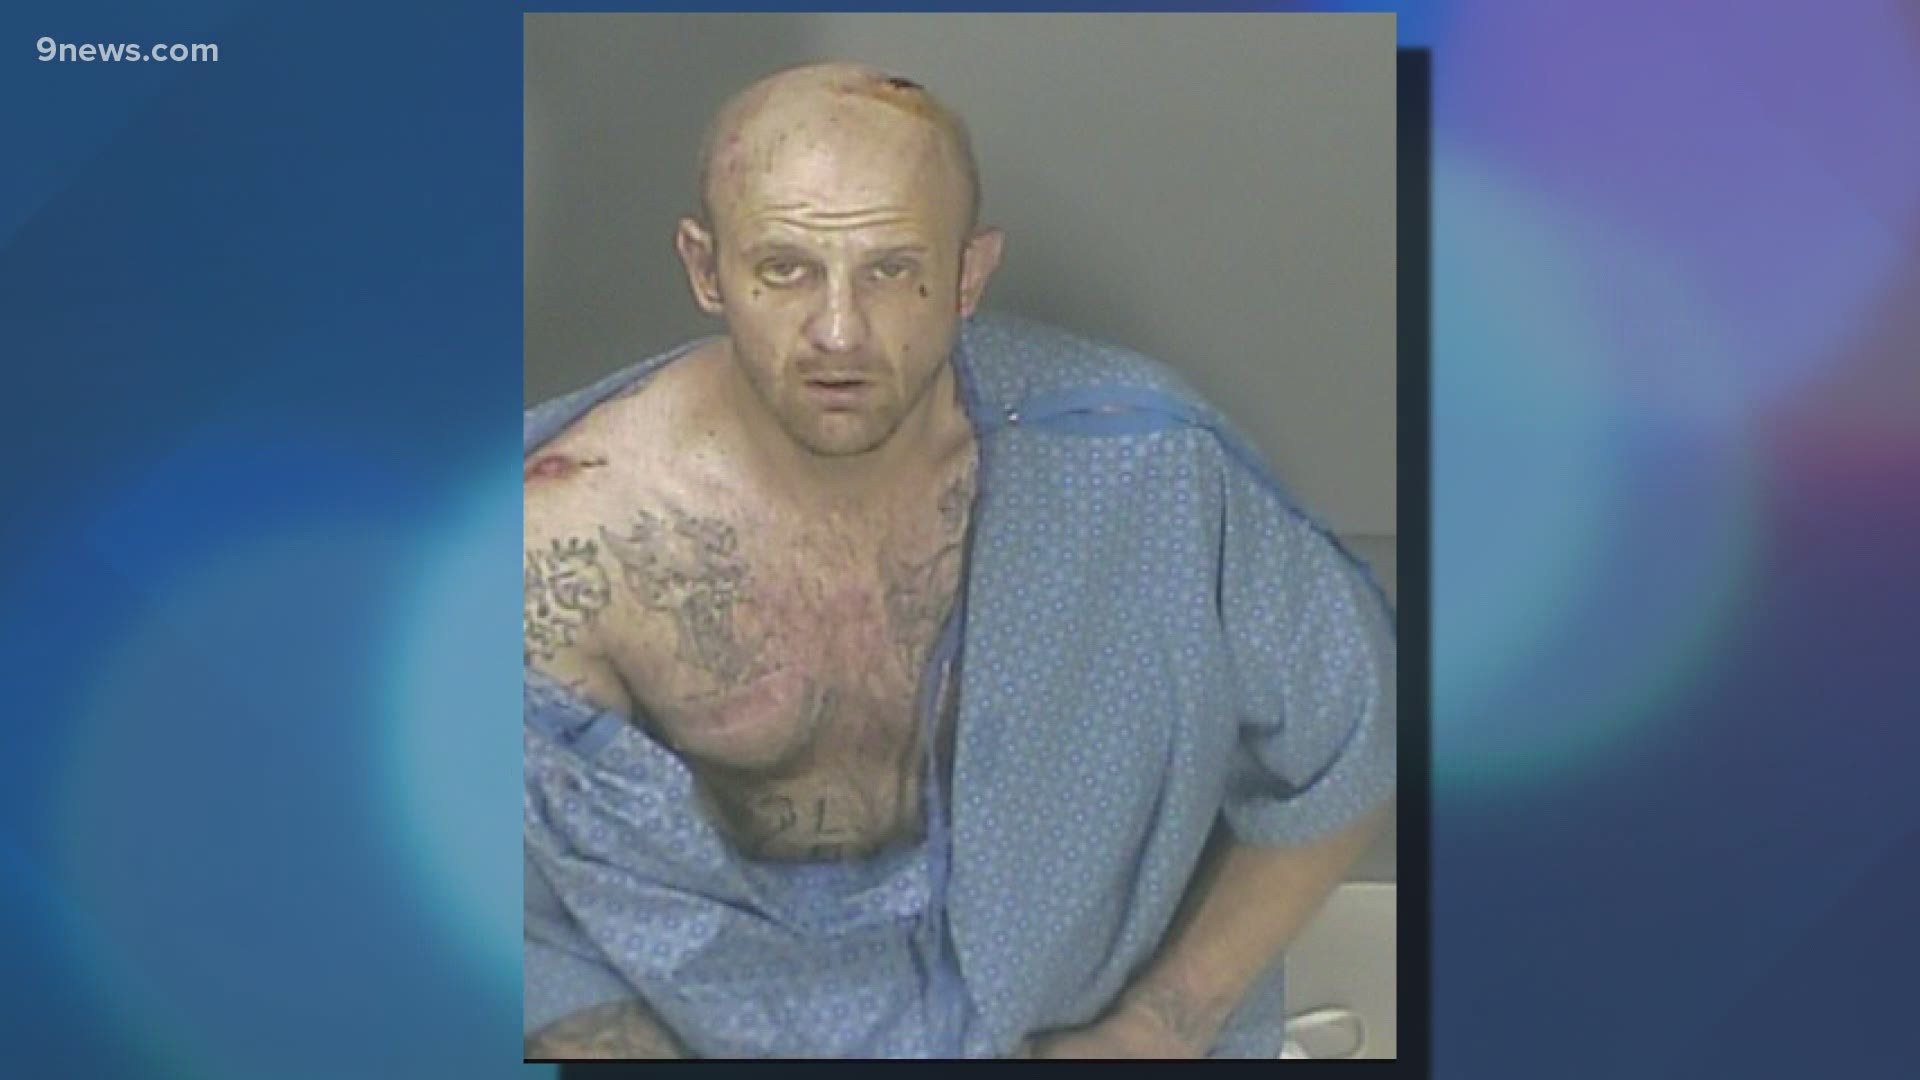 Officers took a man wanted in multiple counties into custody after a pursuit and struggle in the area of West 80th Avenue and Wadsworth Boulevard, police said.